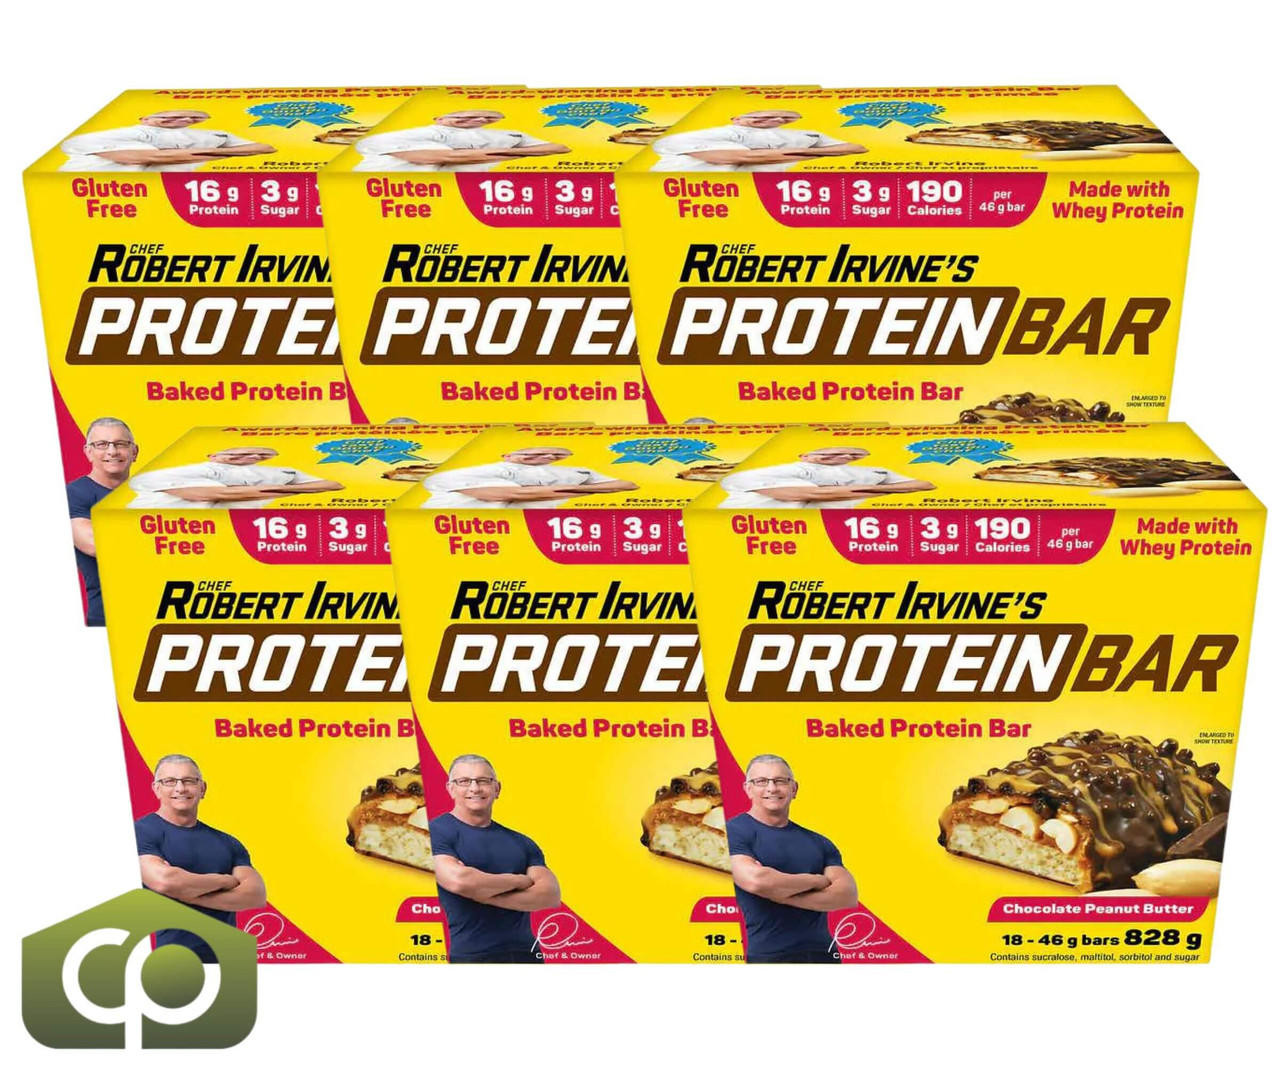  Chef Robert Irvine's Baked Protein Bars, Chocolate Peanut Butter 46g (6/Case) 